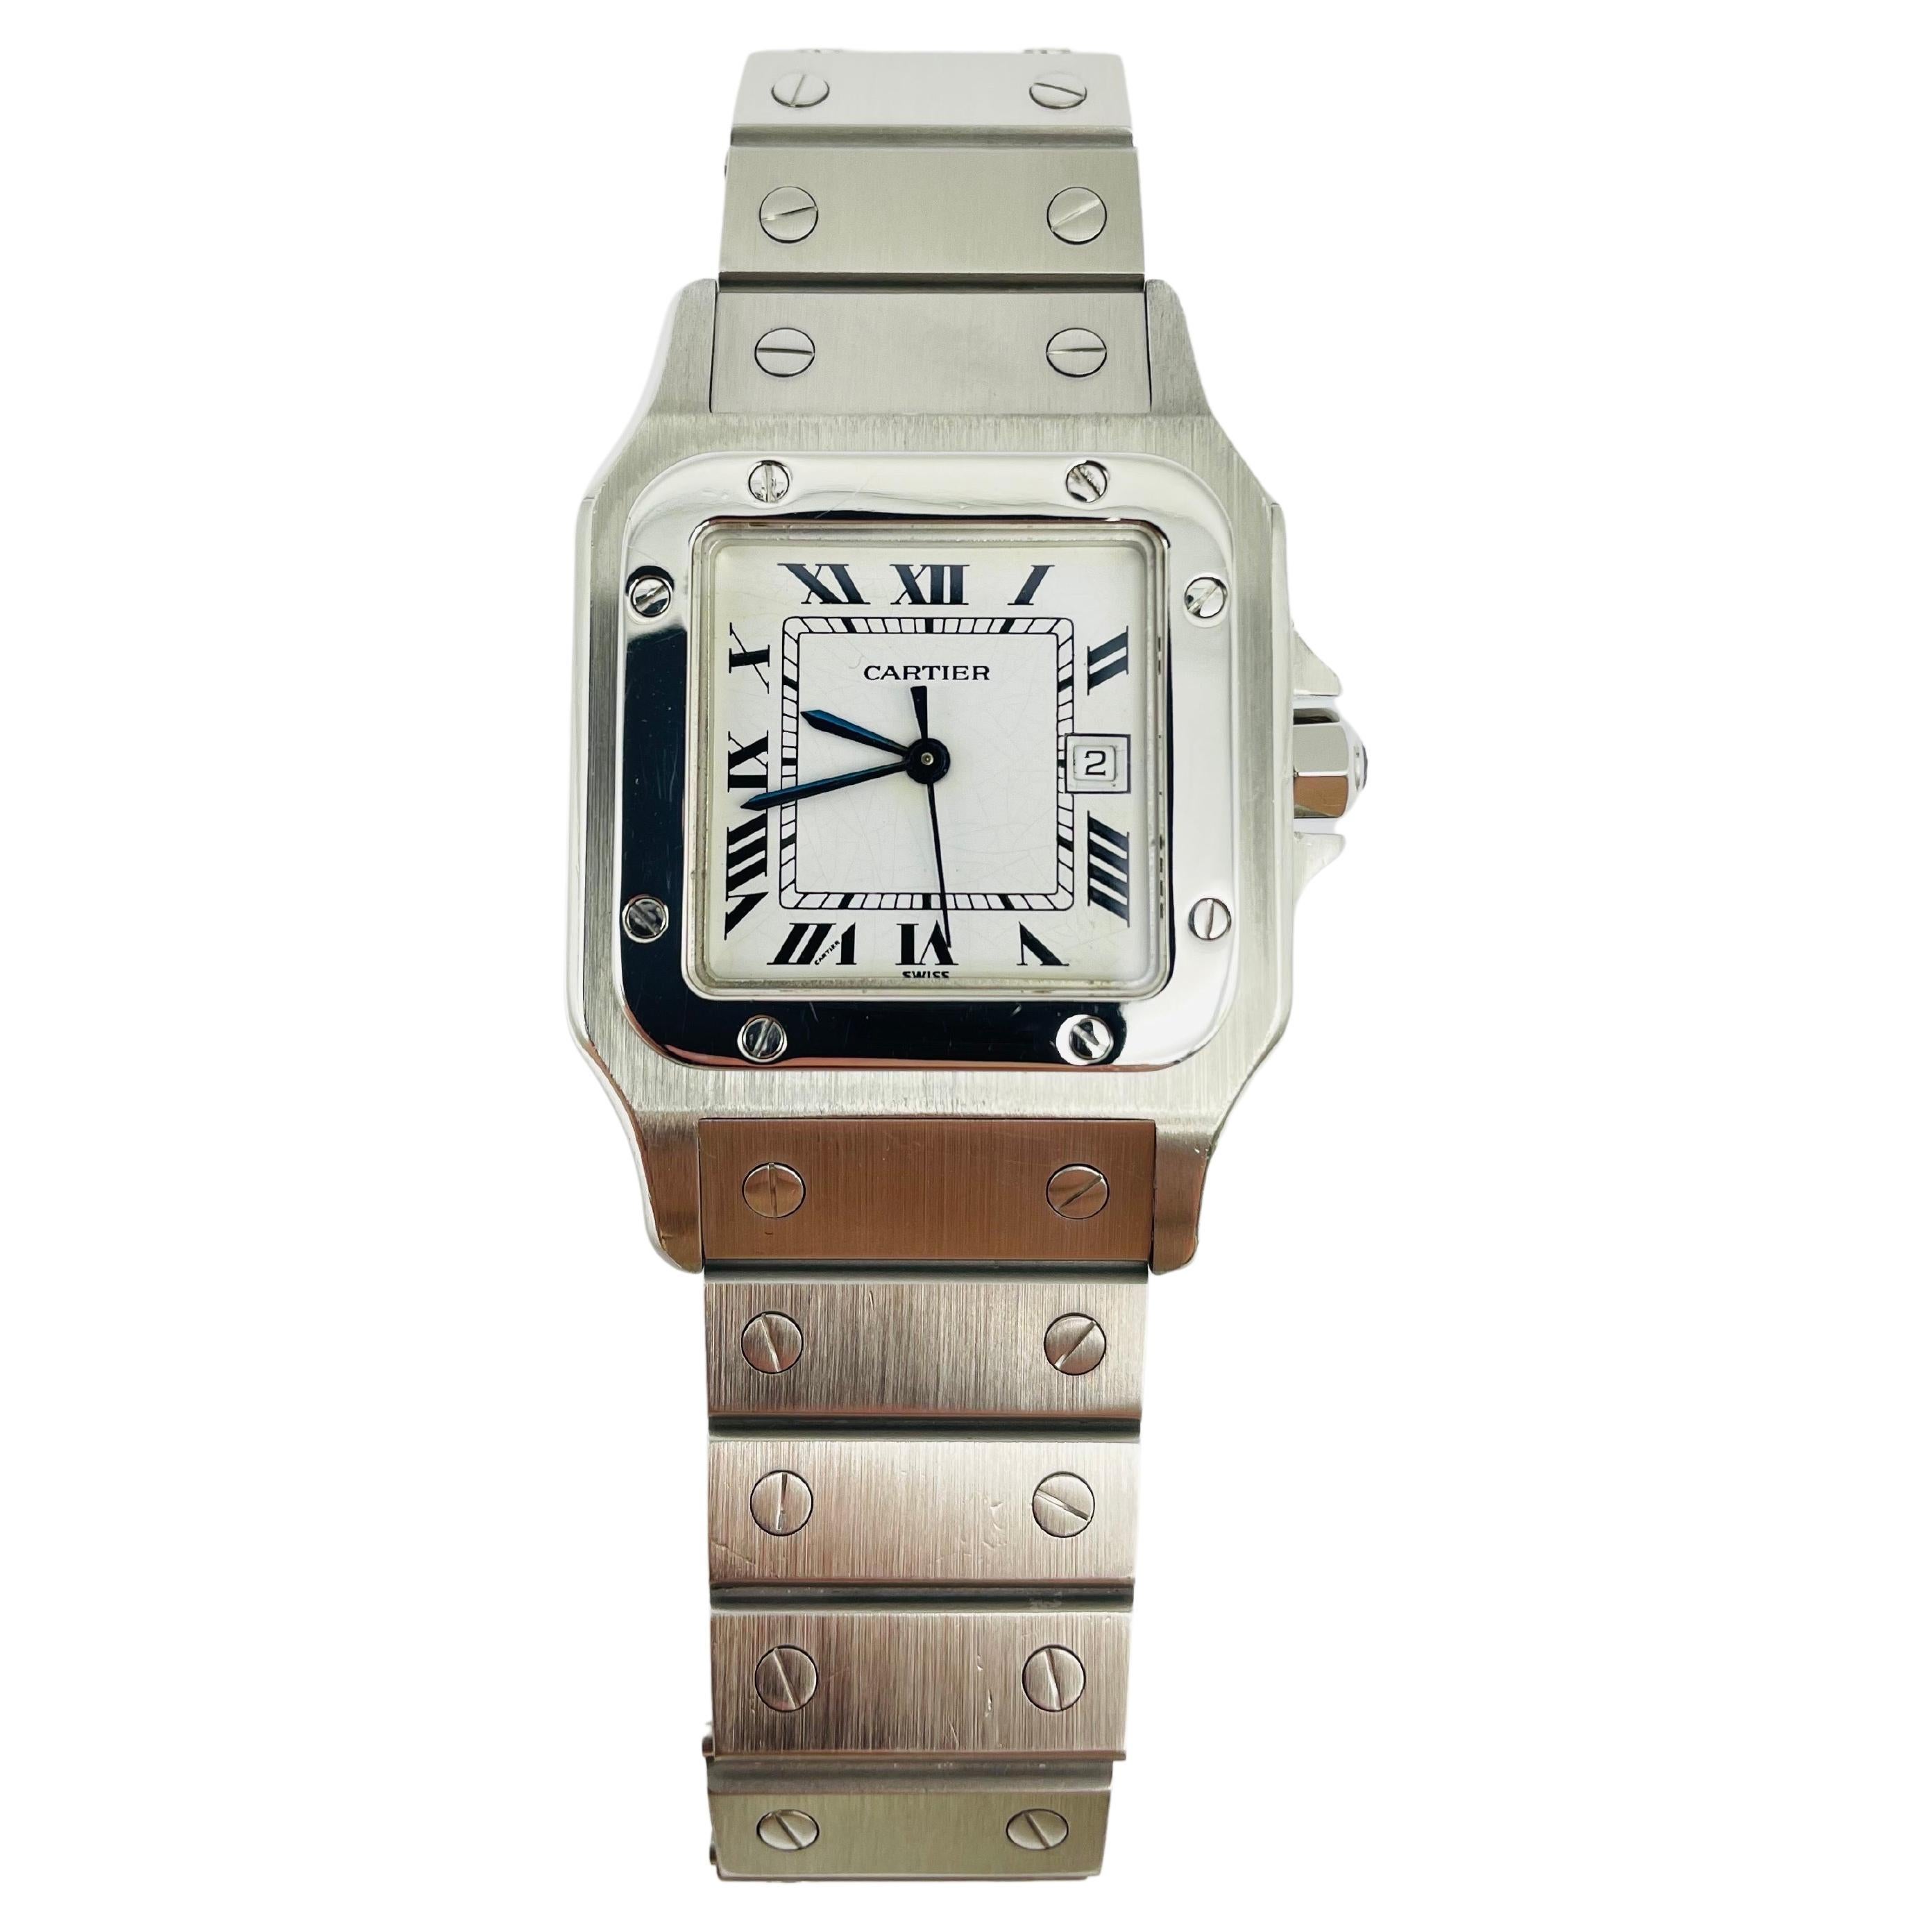 Are Cartier watches automatic?